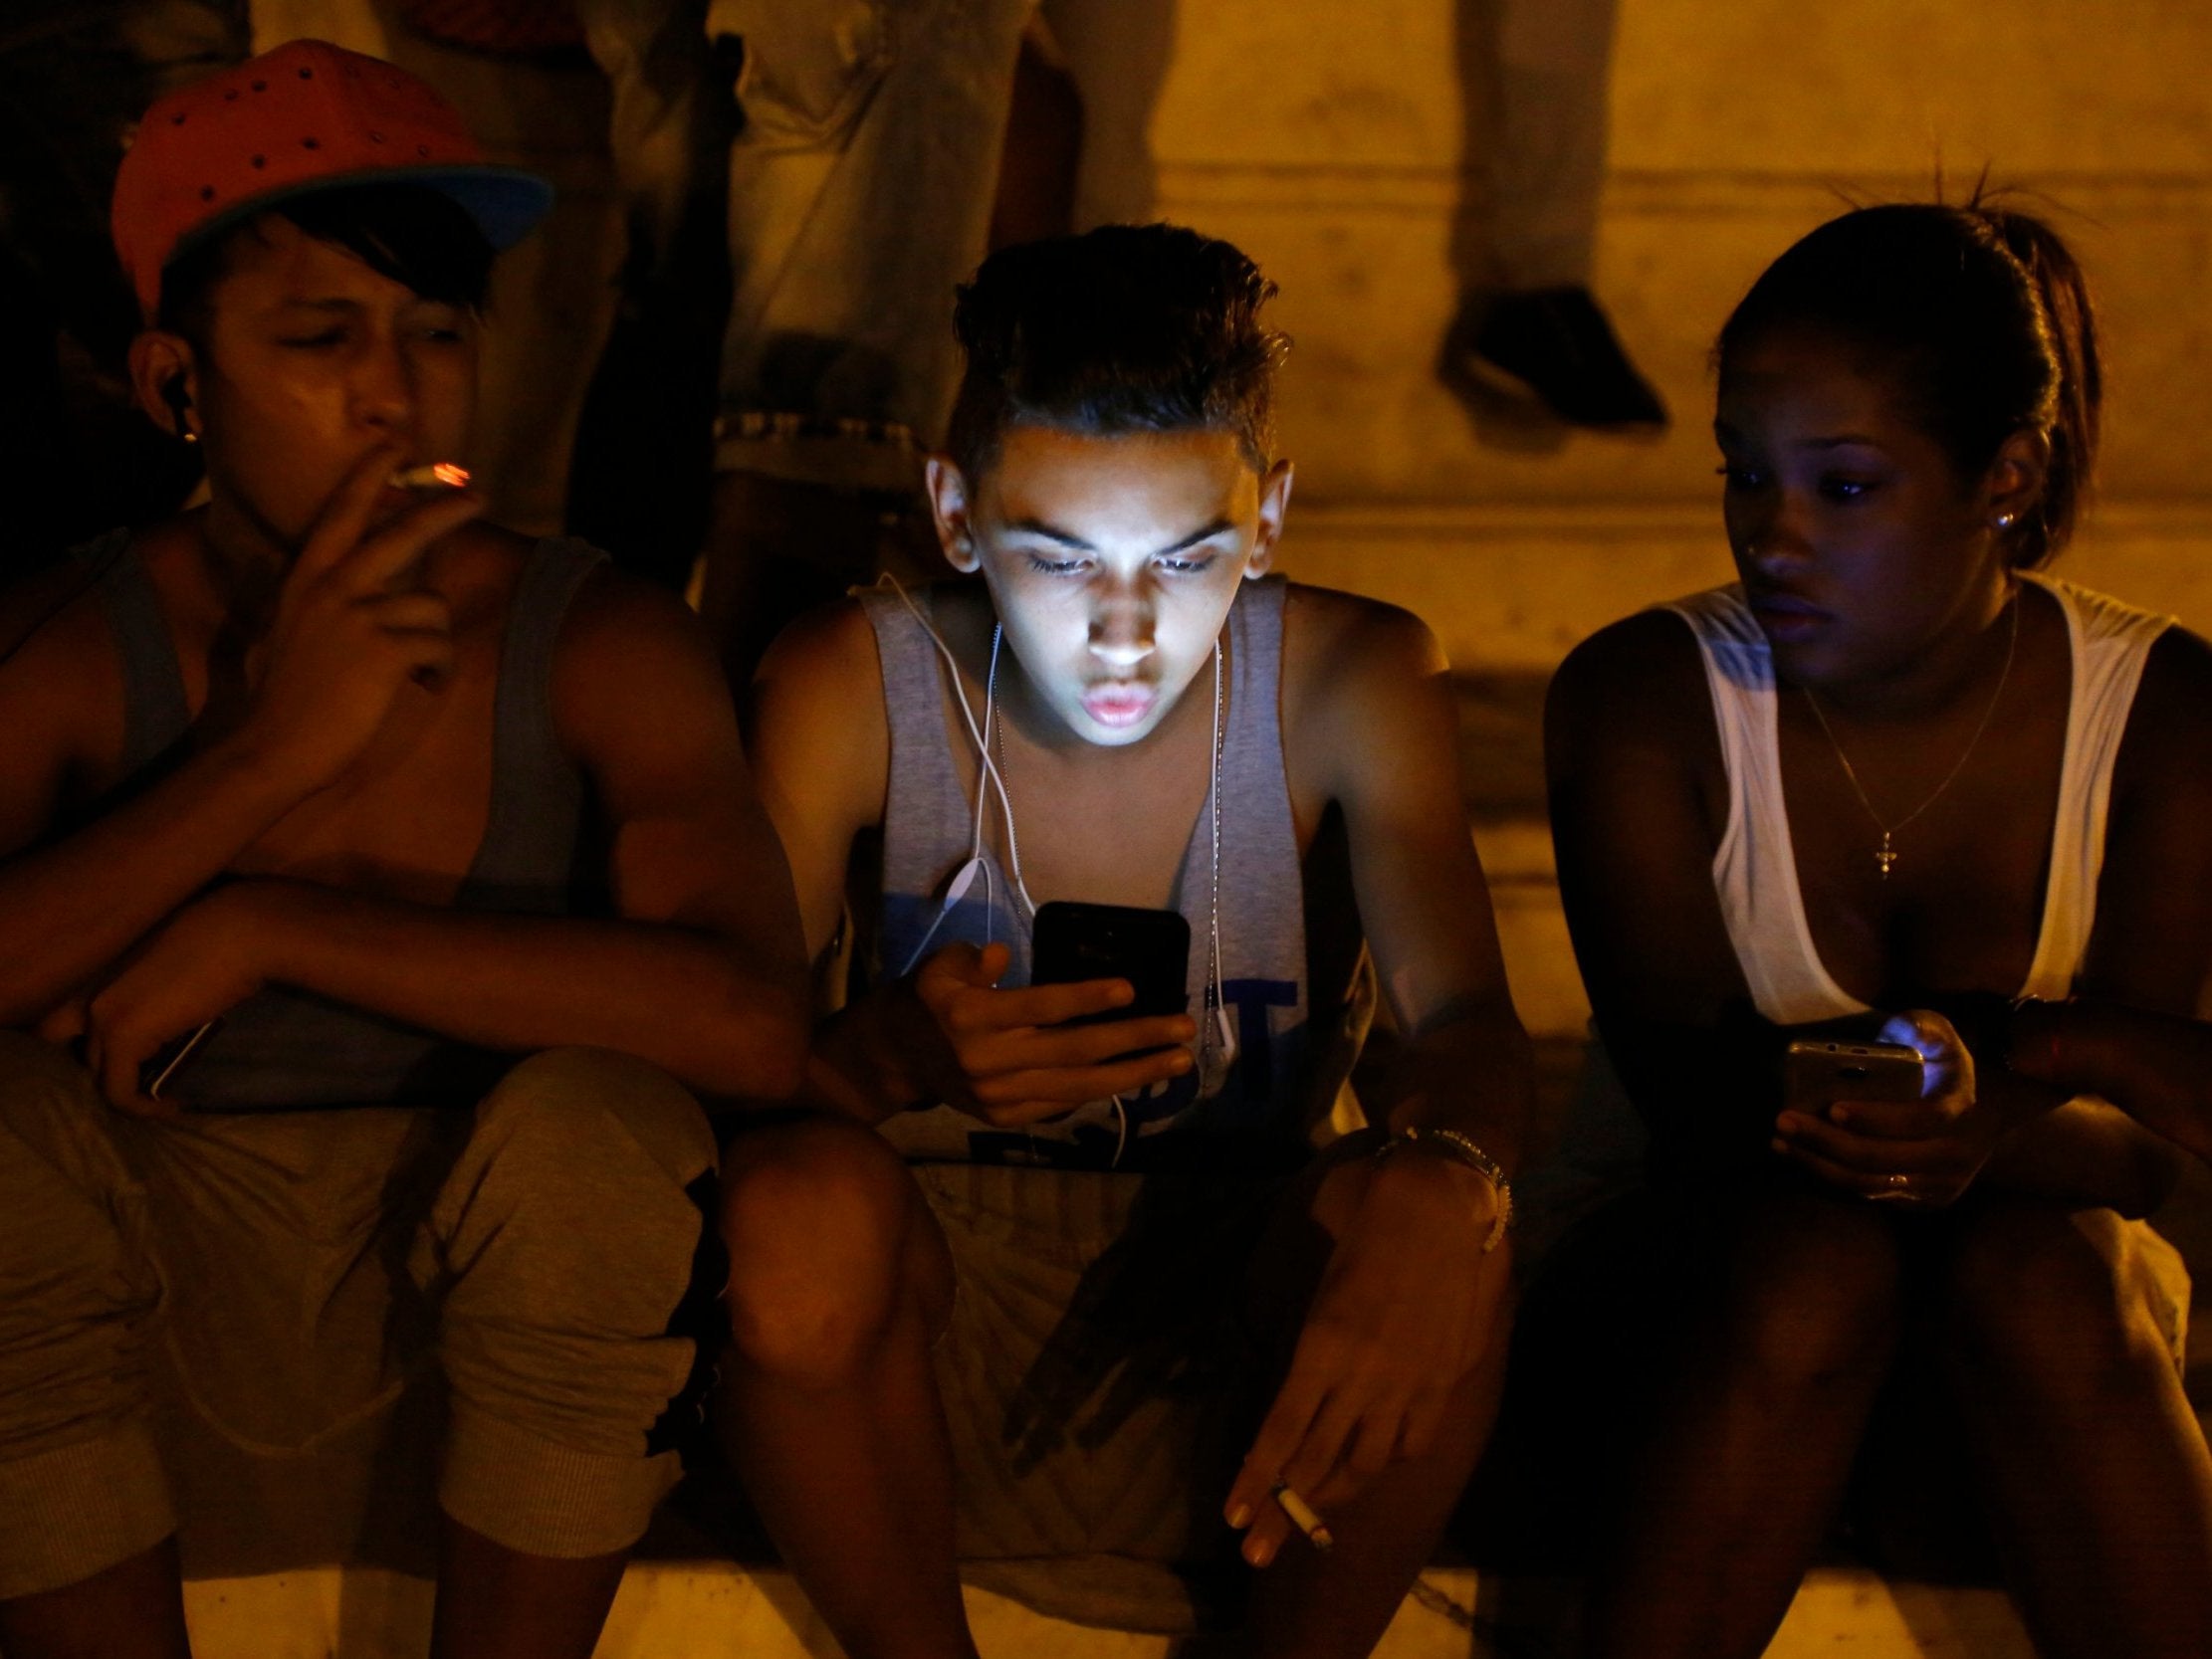 Cuban youths use a password protected wifi network coming from a five star hotel to surf the Internet on their smartphones in downtown Havana